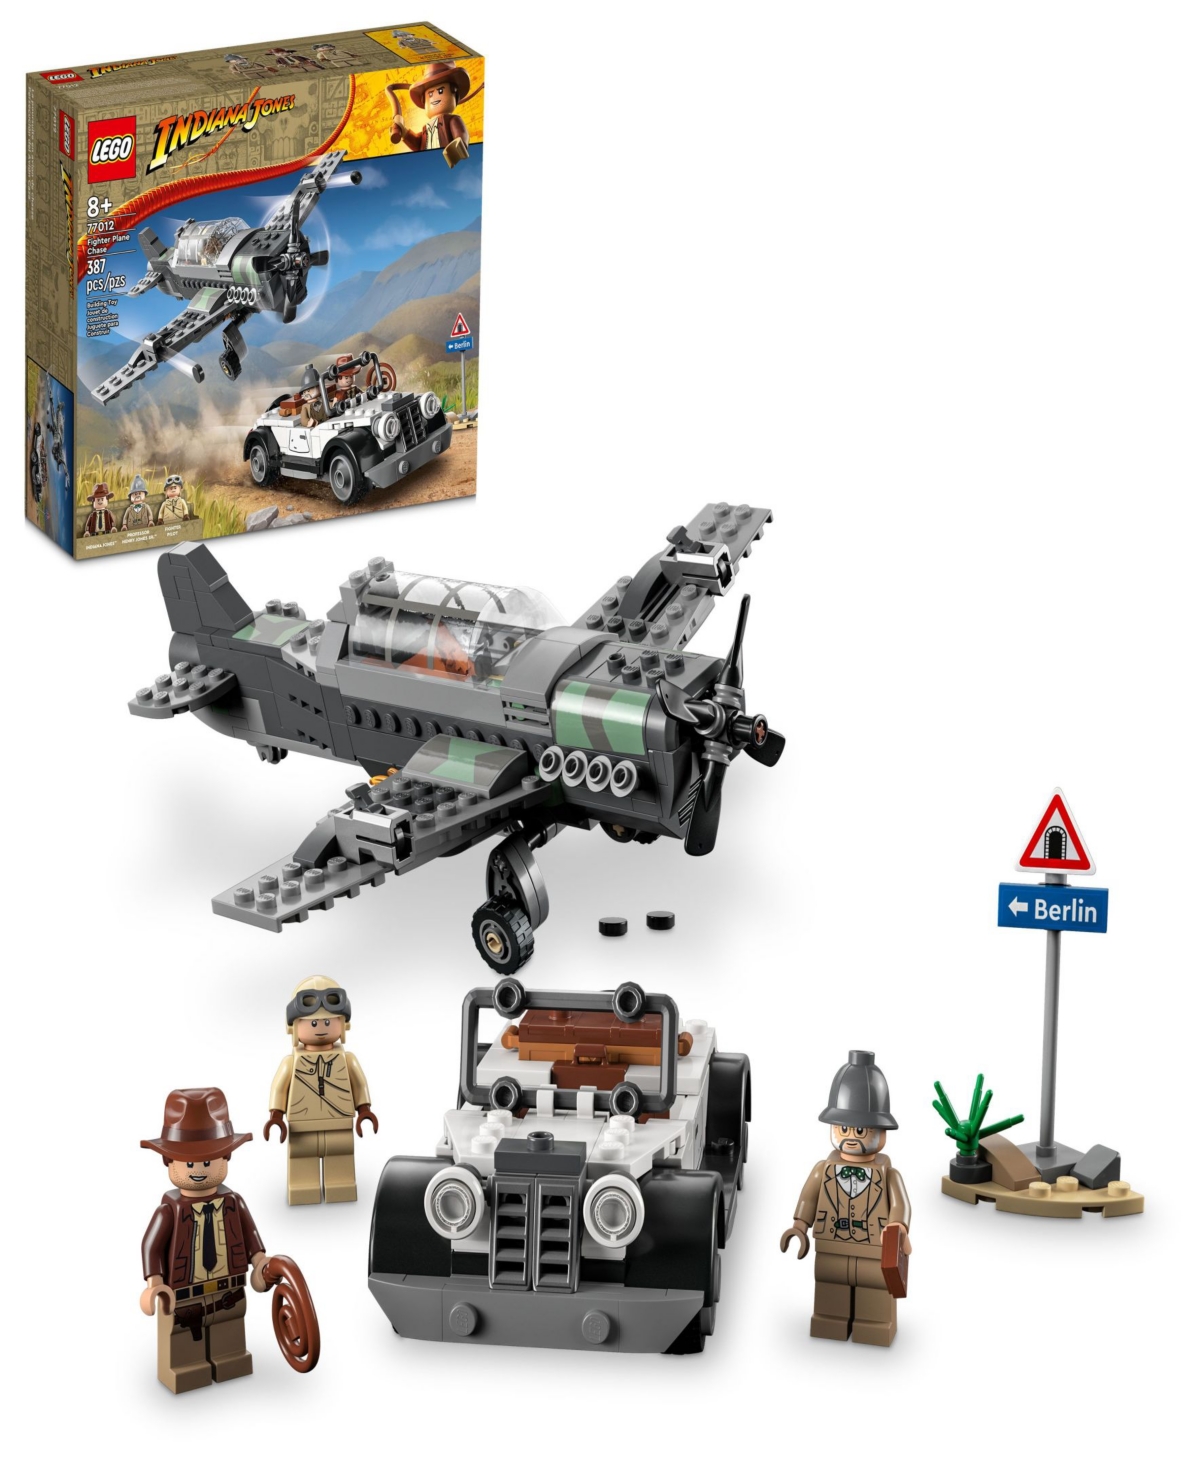 Lego Indiana Jones 77012 Fighter Plane Chase Toy Airplane Building Set With Indiana Jones, Professor Henr In Multicolor